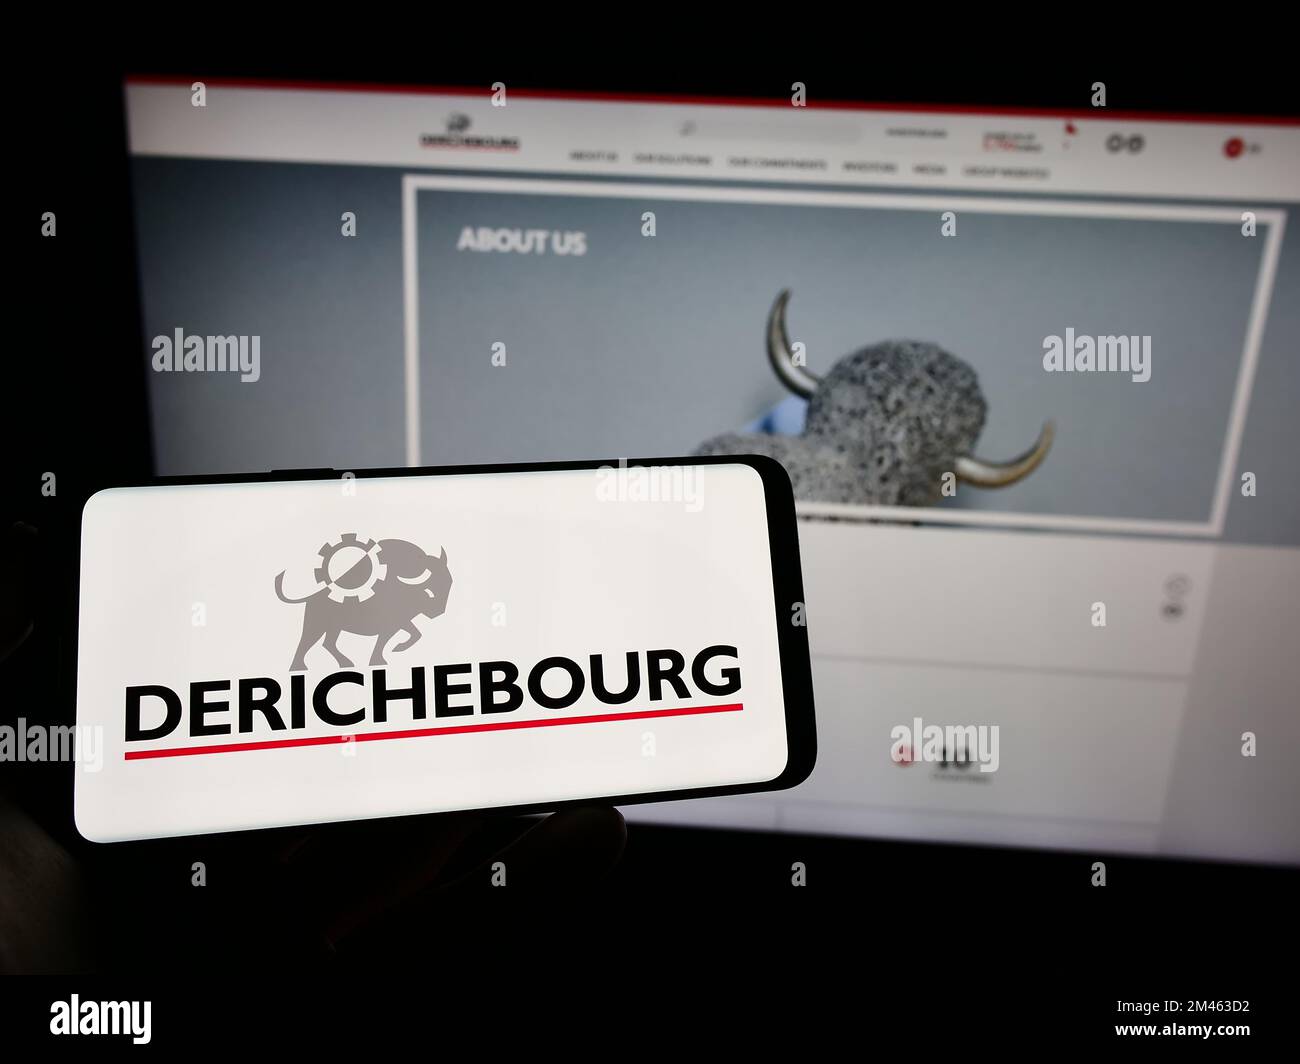 Person holding mobile phone with logo of French recycling company Derichebourg SA on screen in front of business web page. Focus on phone display. Stock Photo